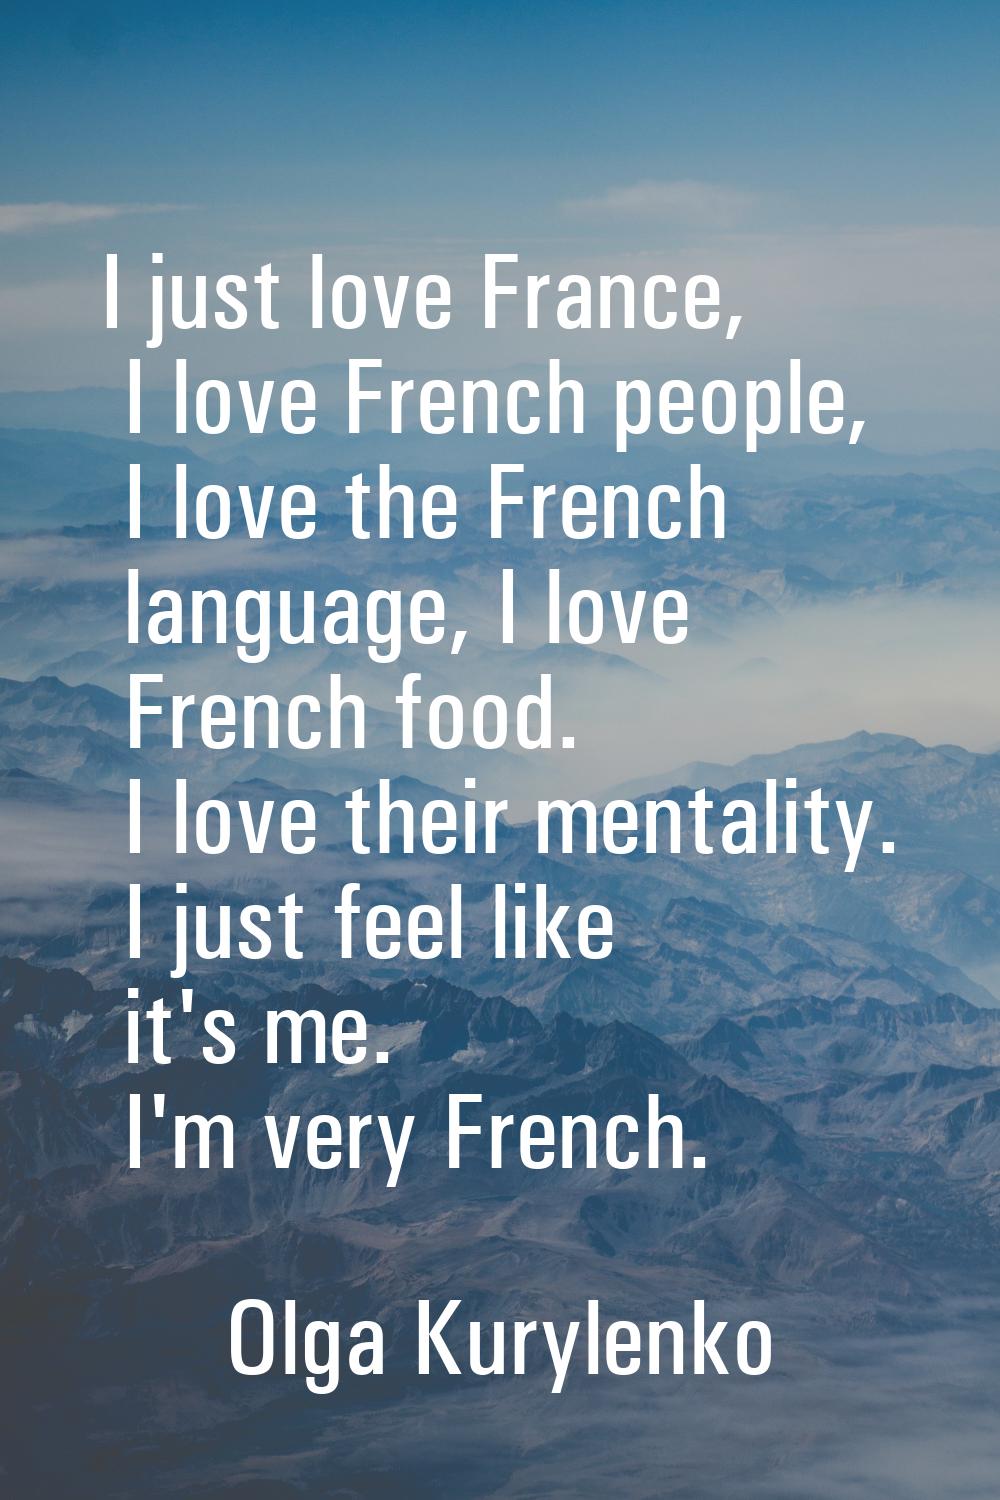 I just love France, I love French people, I love the French language, I love French food. I love th